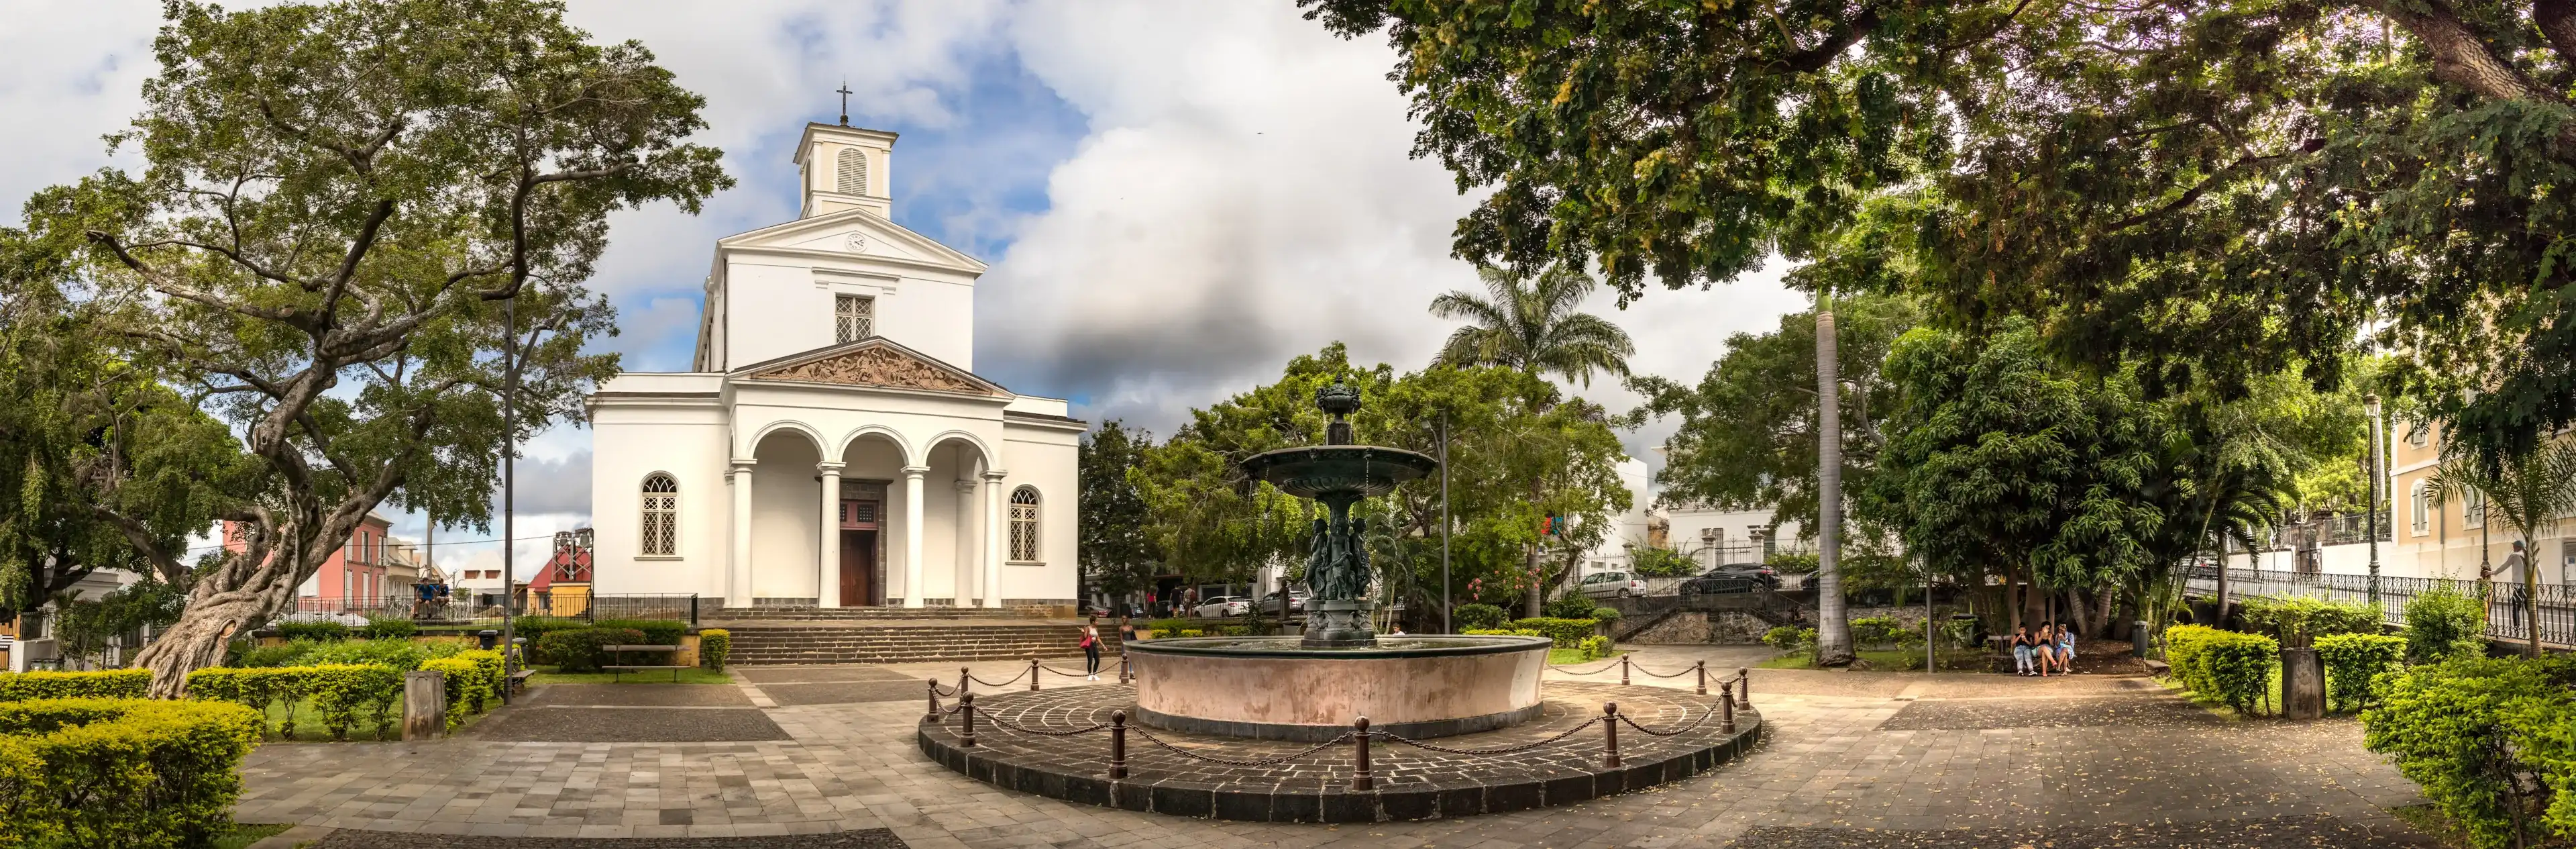 Saint Denis, Reunion Island - January 26th, 2019: Panoramic view of the St Denis Cathedral located next the Cathedral Fountain., Reunion Island.